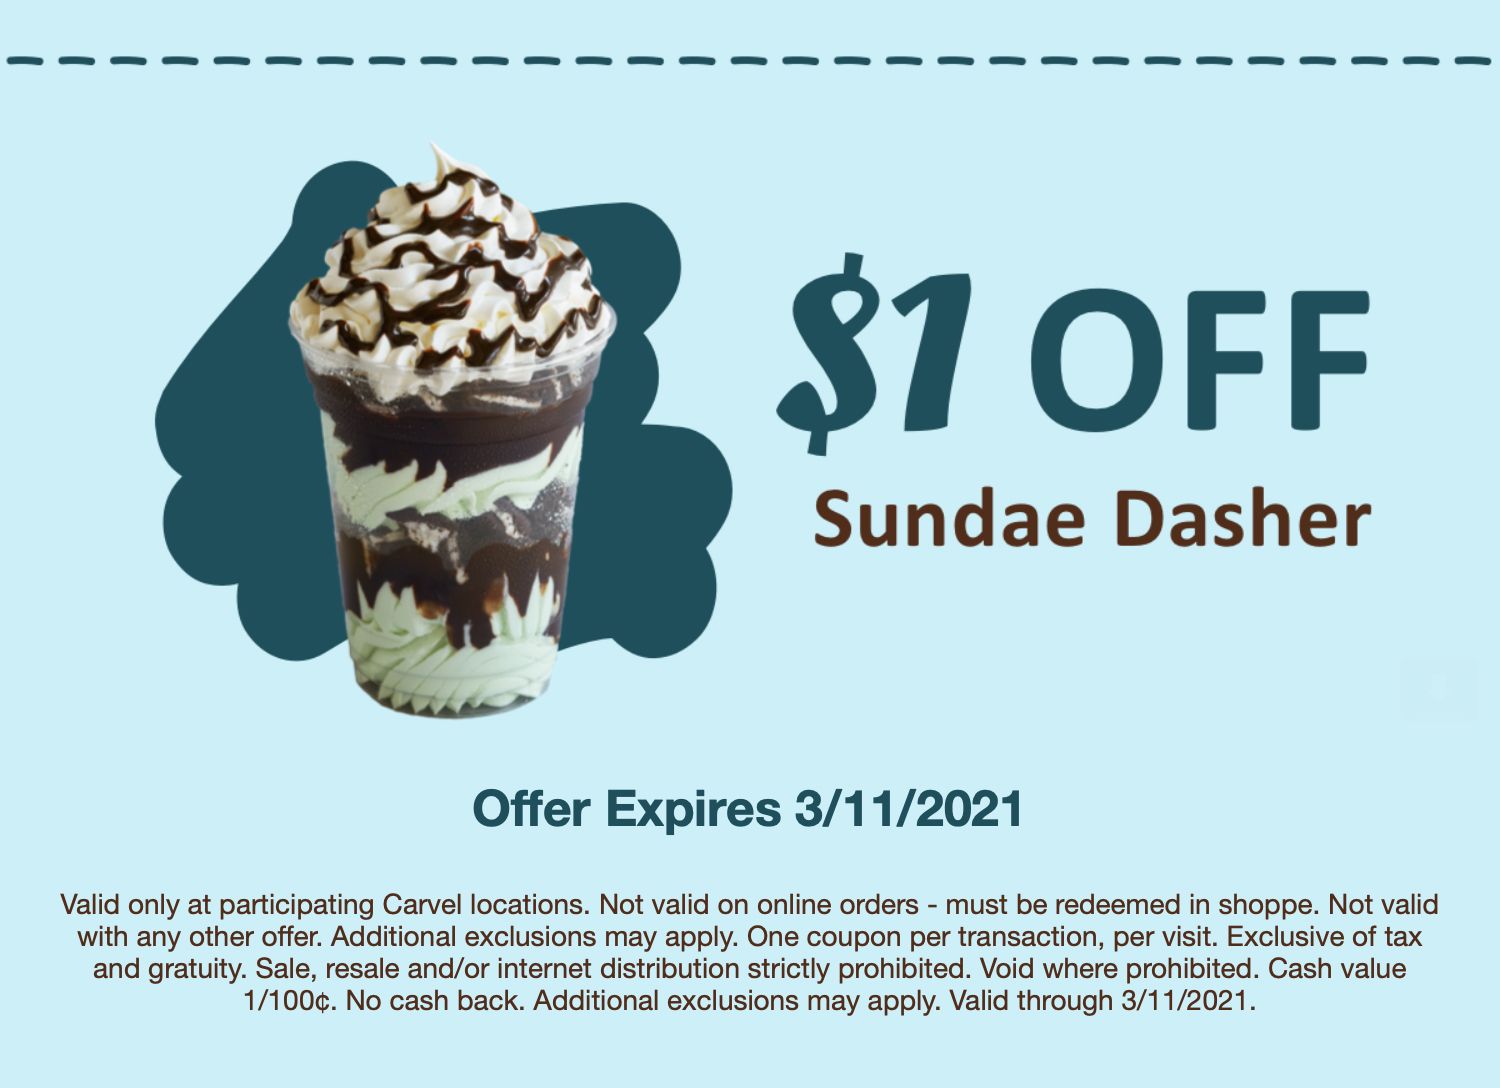 Fudgie Fanatics Check Your Inbox to Save $1 Off Your Next Sundae Dasher at Carvel 